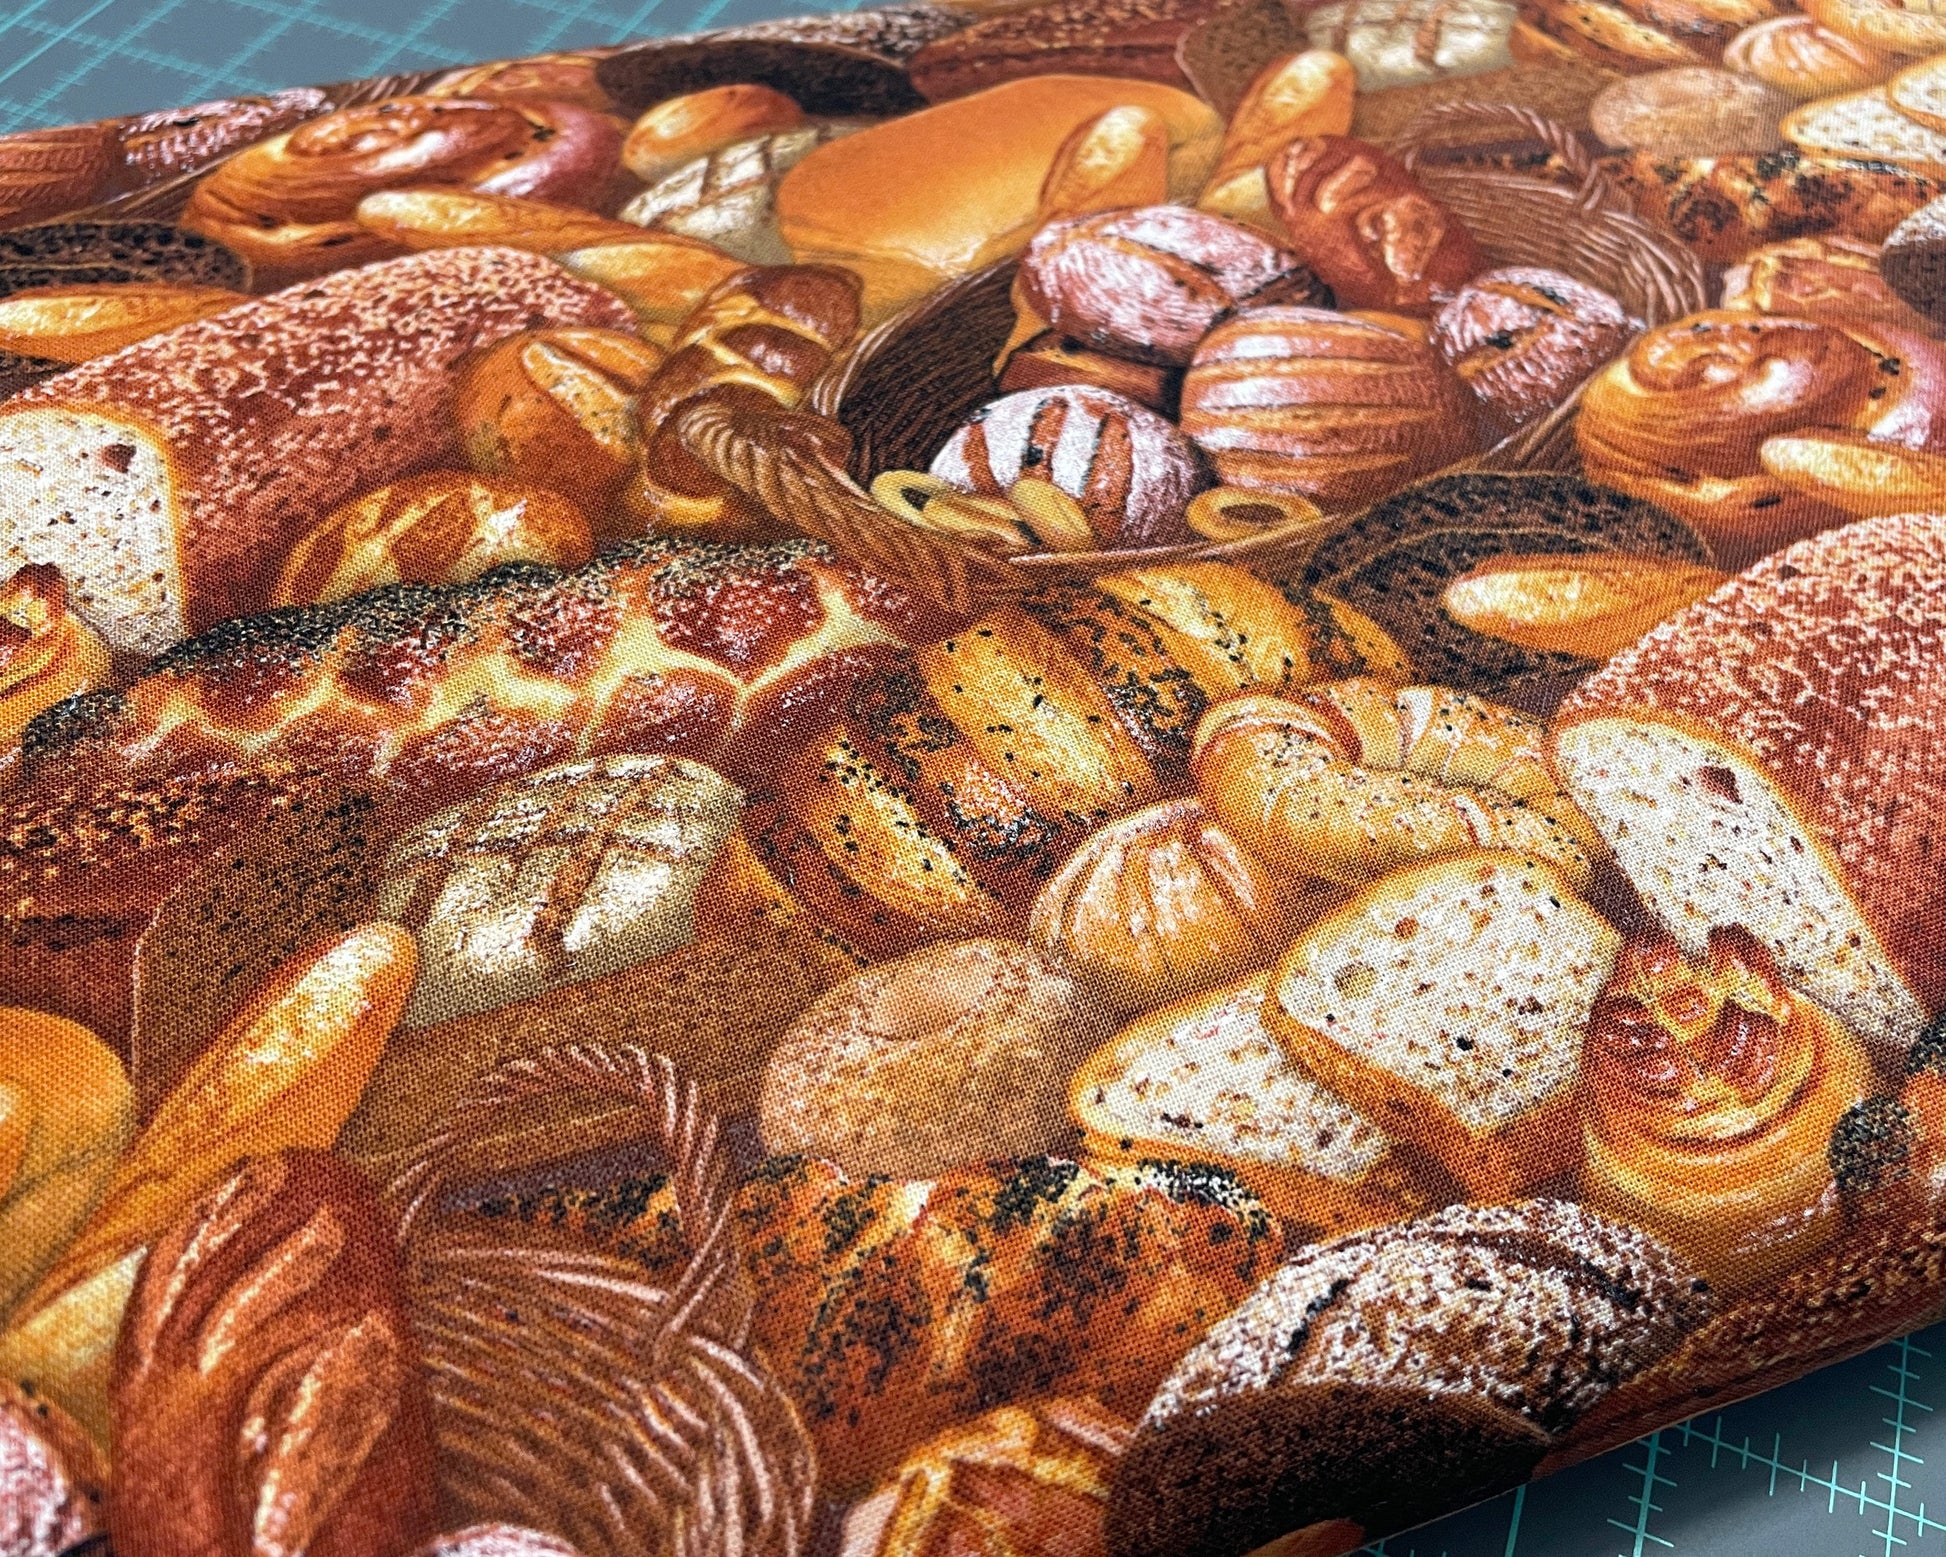 Bread Fabric - Food Festival collection by Elizabeth Studios - 100% Cotton Fabric - Food theme Baking Bread Loaf Kitchen - Ships NEXT DAY